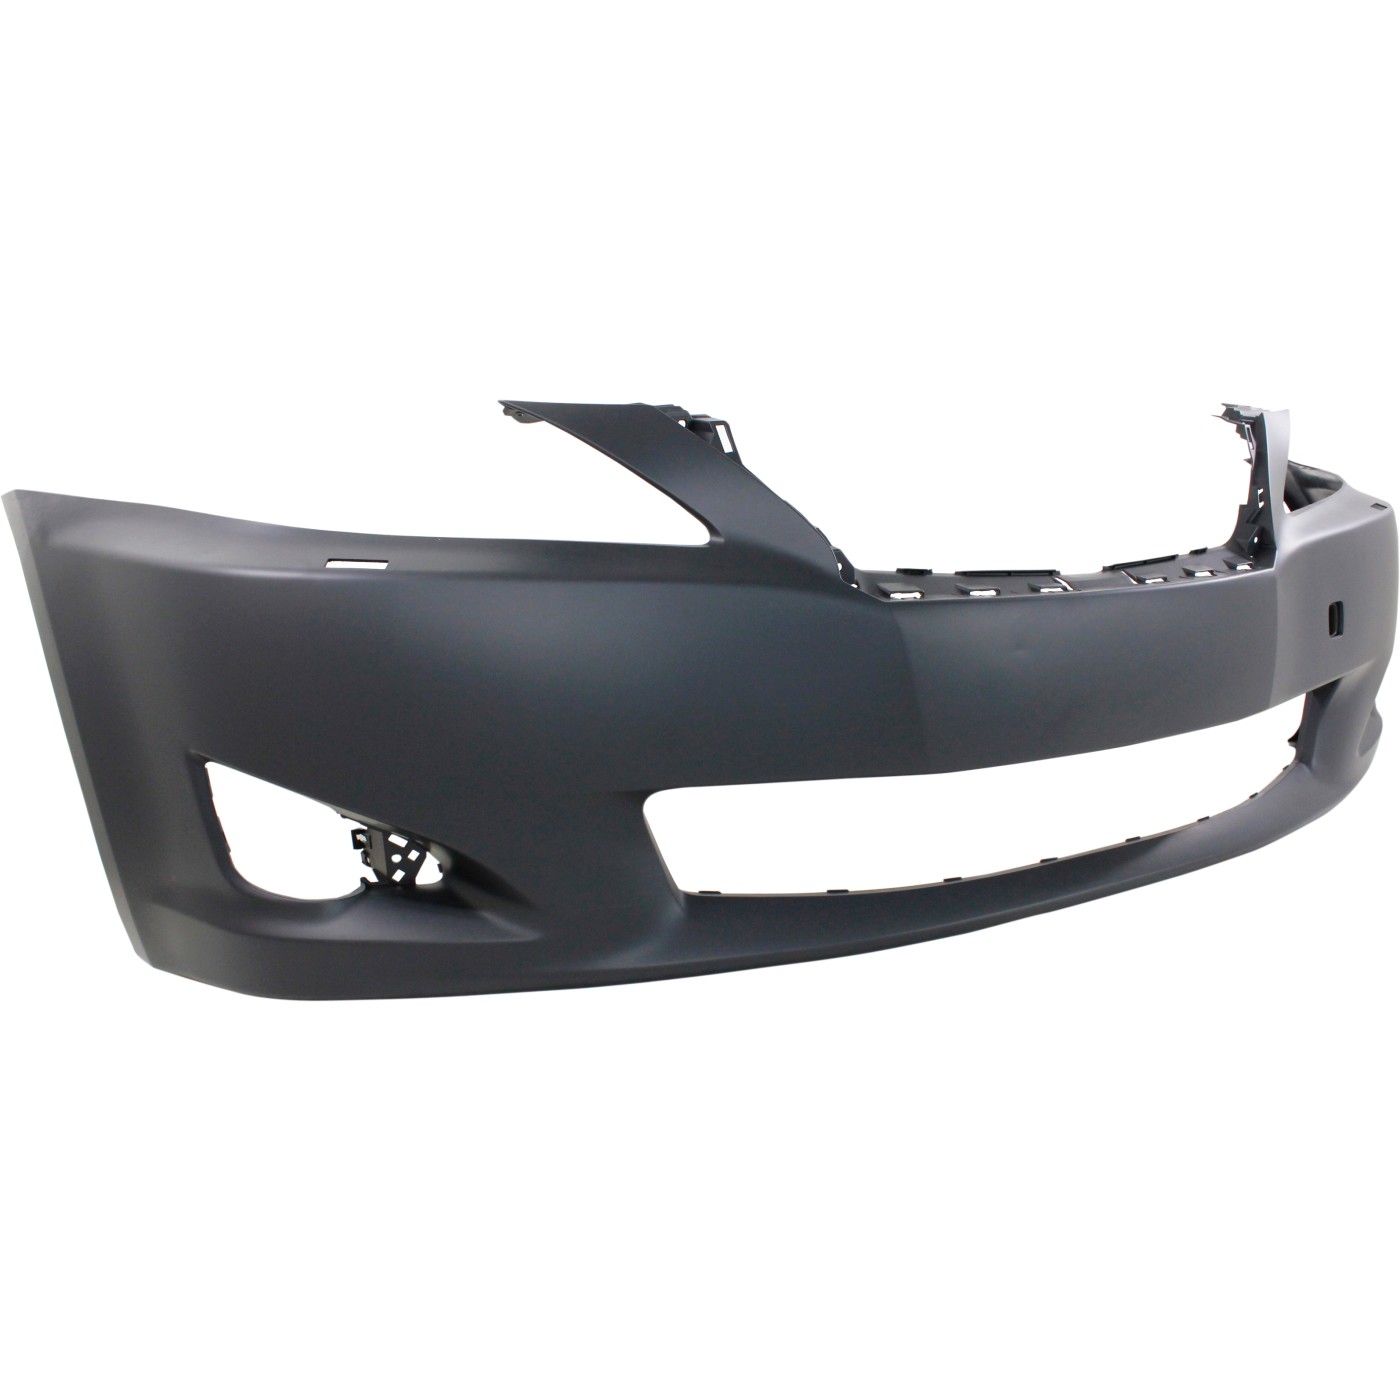 Front Bumper Cover For 20092010 Lexus IS250 w/Headlight